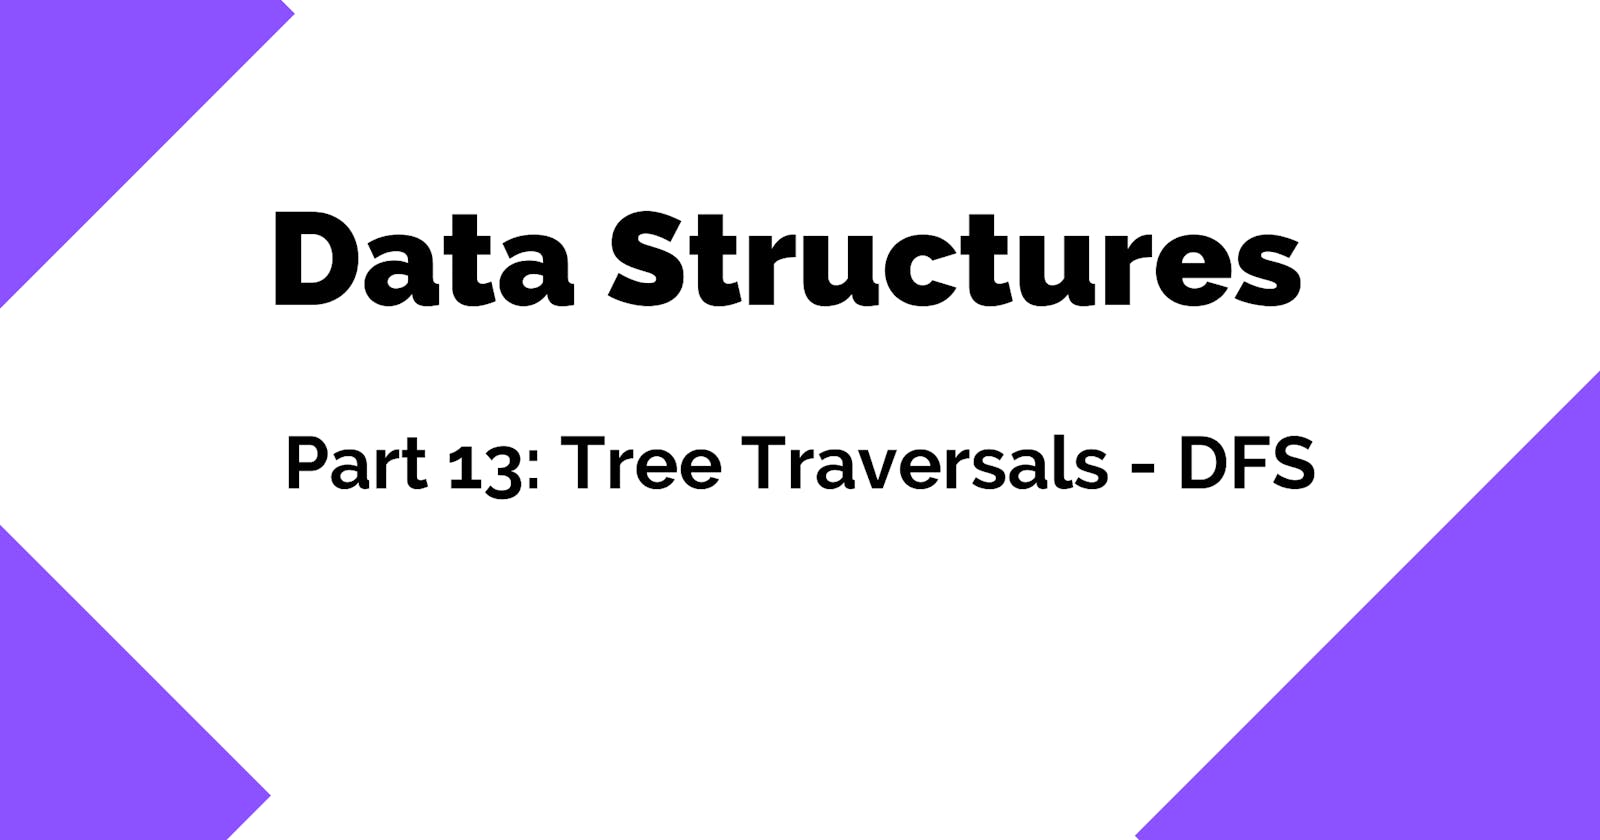 Data Structures 101: Tree Traversal - DFS (Pre, In & Post)